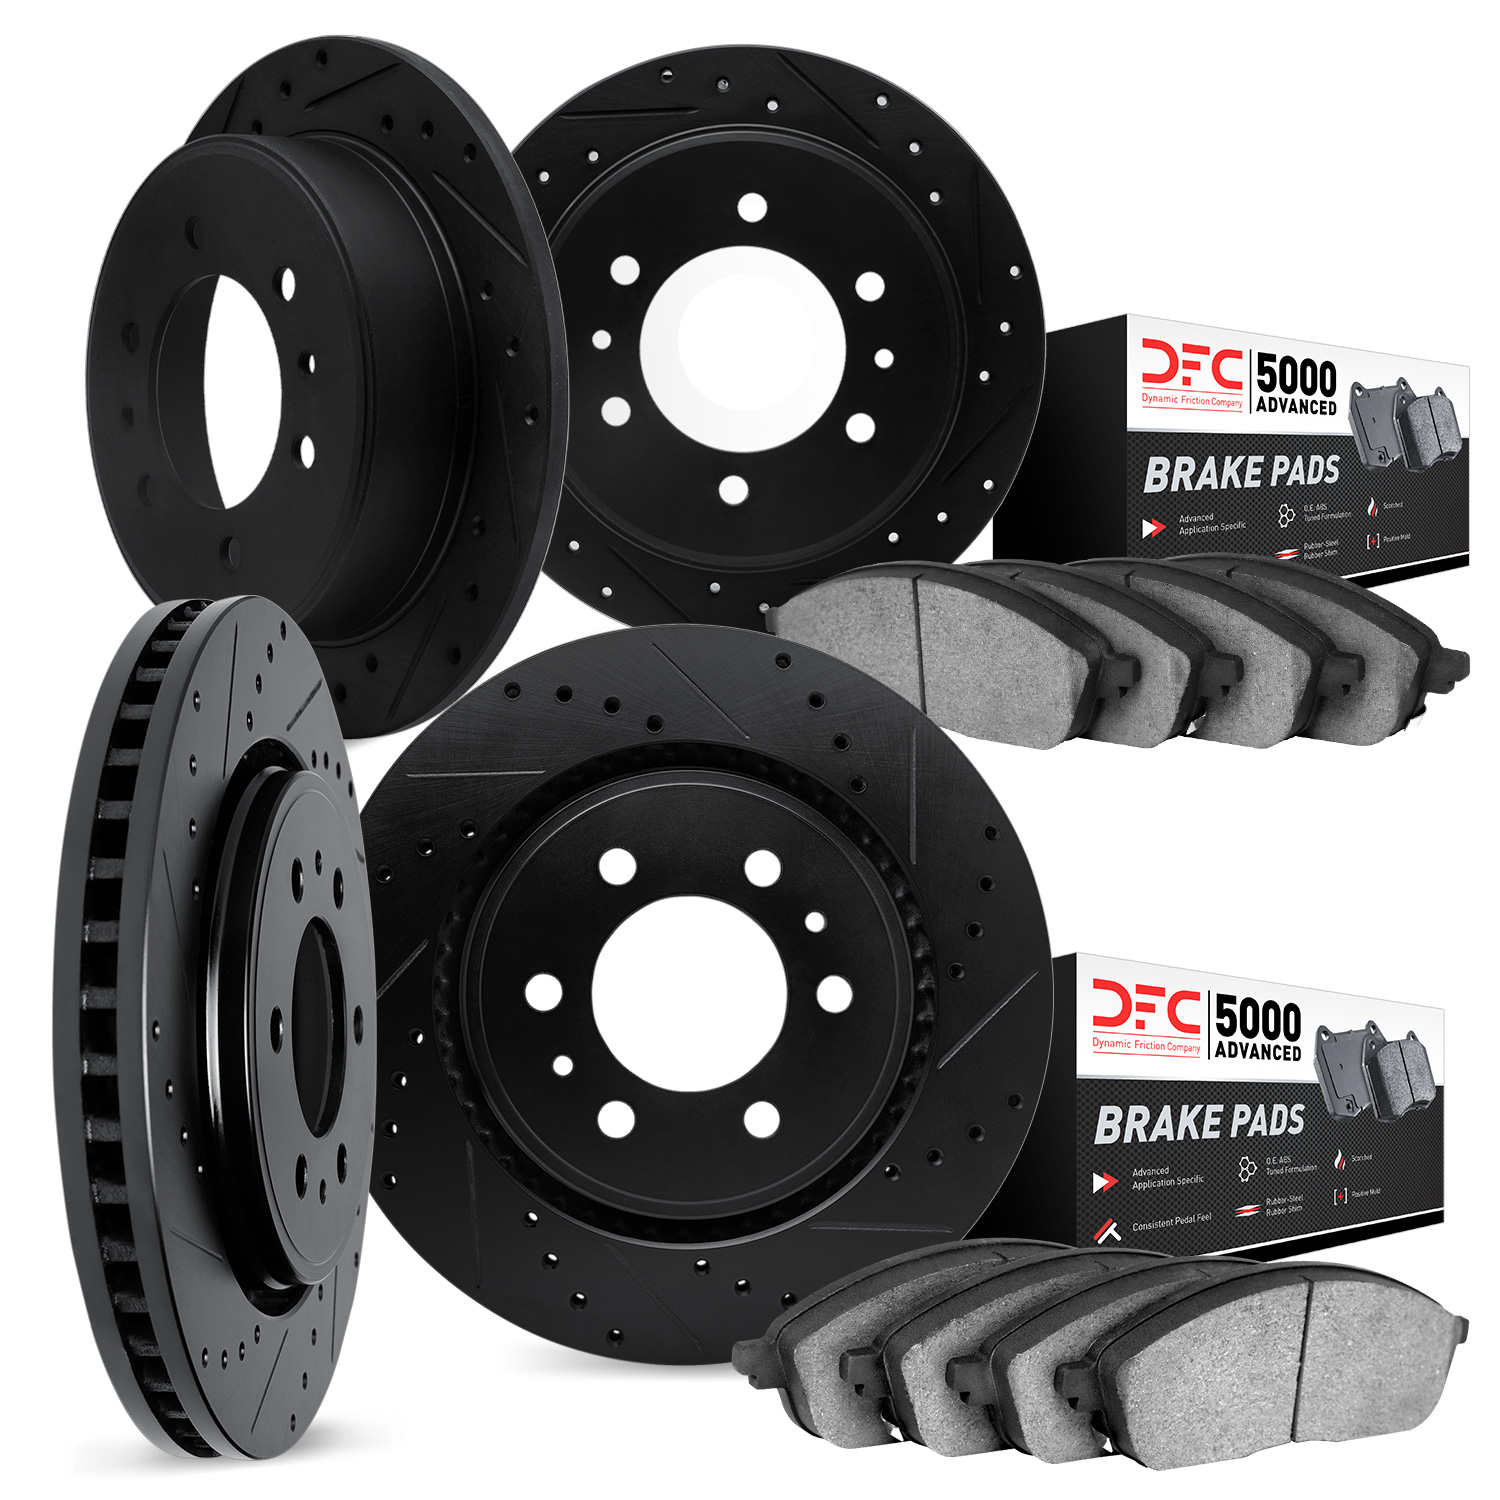 8504-67110 Drilled/Slotted Brake Rotors w/5000 Advanced Brake Pads Kit [Black], 2004-2005 Infiniti/Nissan, Position: Front and R